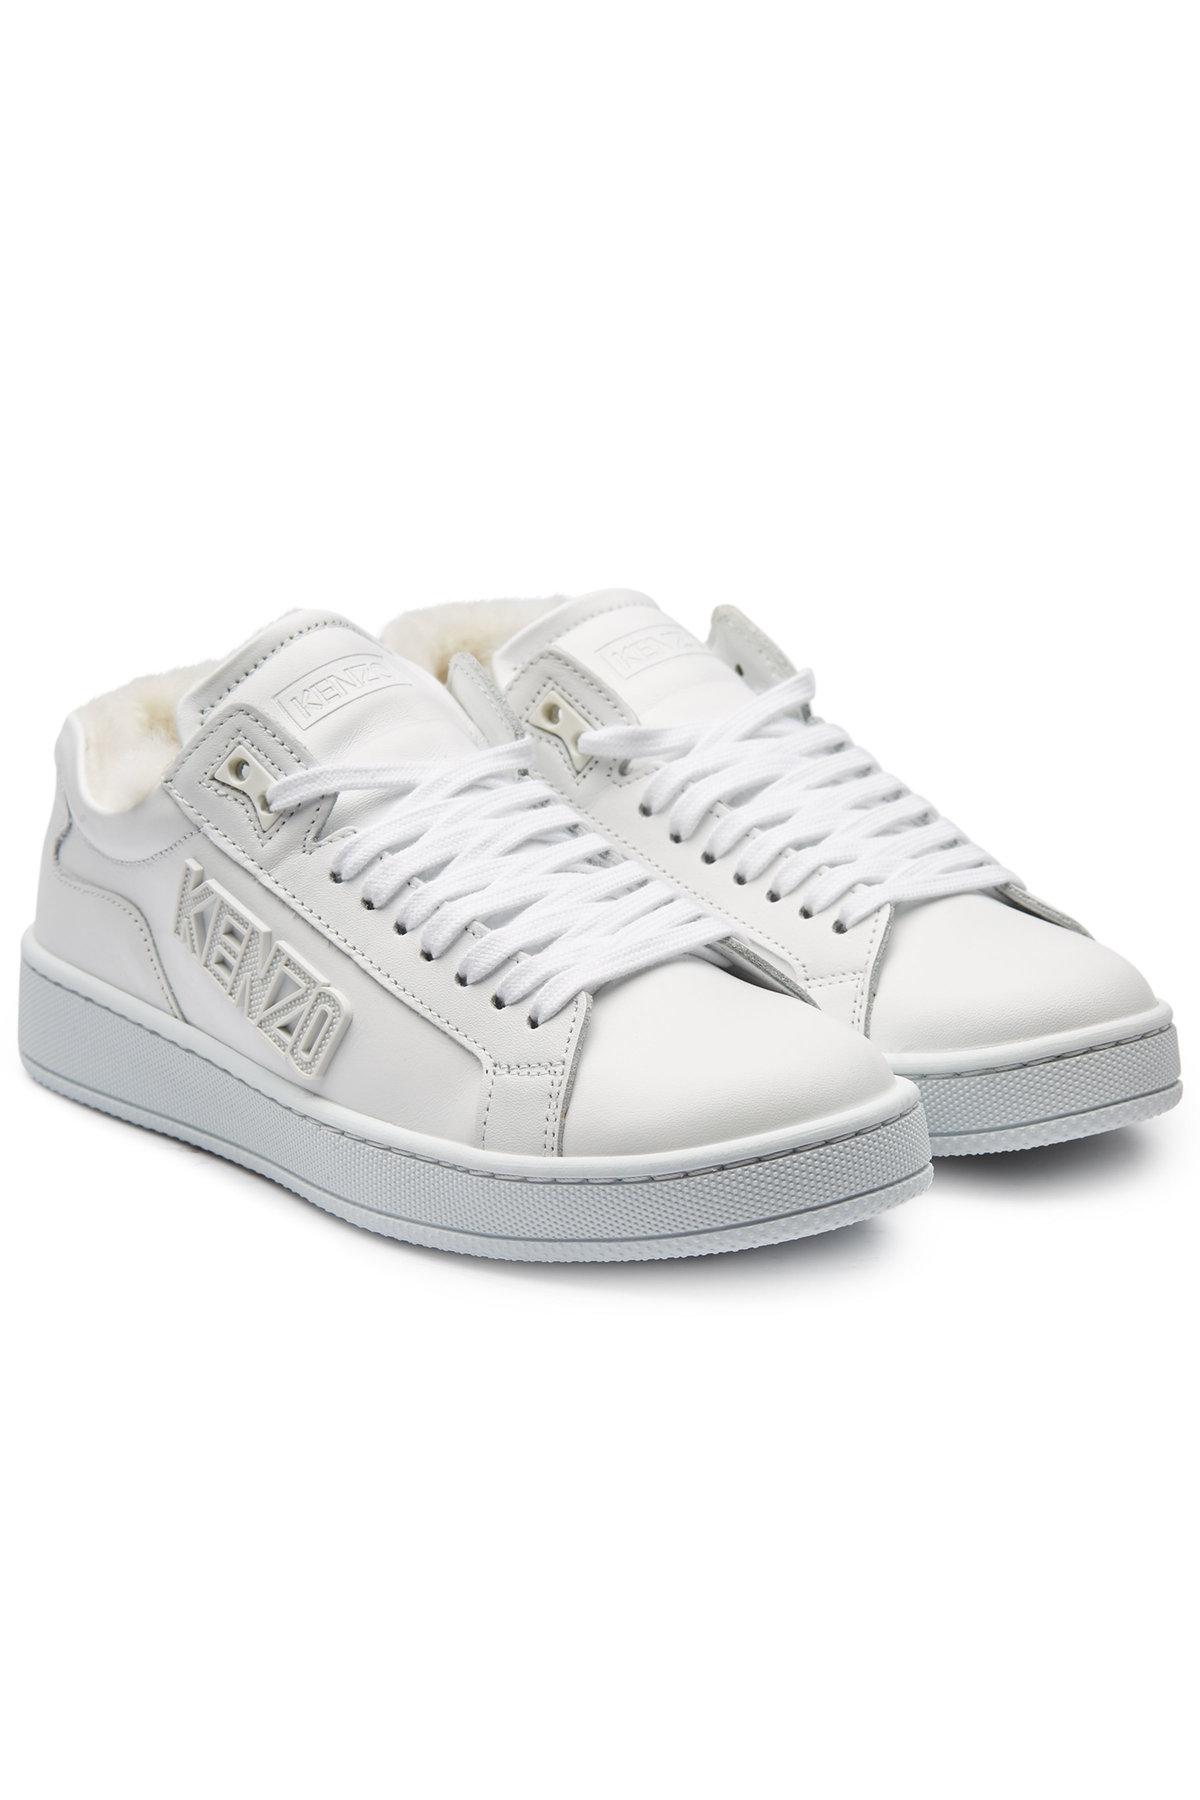 Kenzo Tennix Leather Sneakers With 